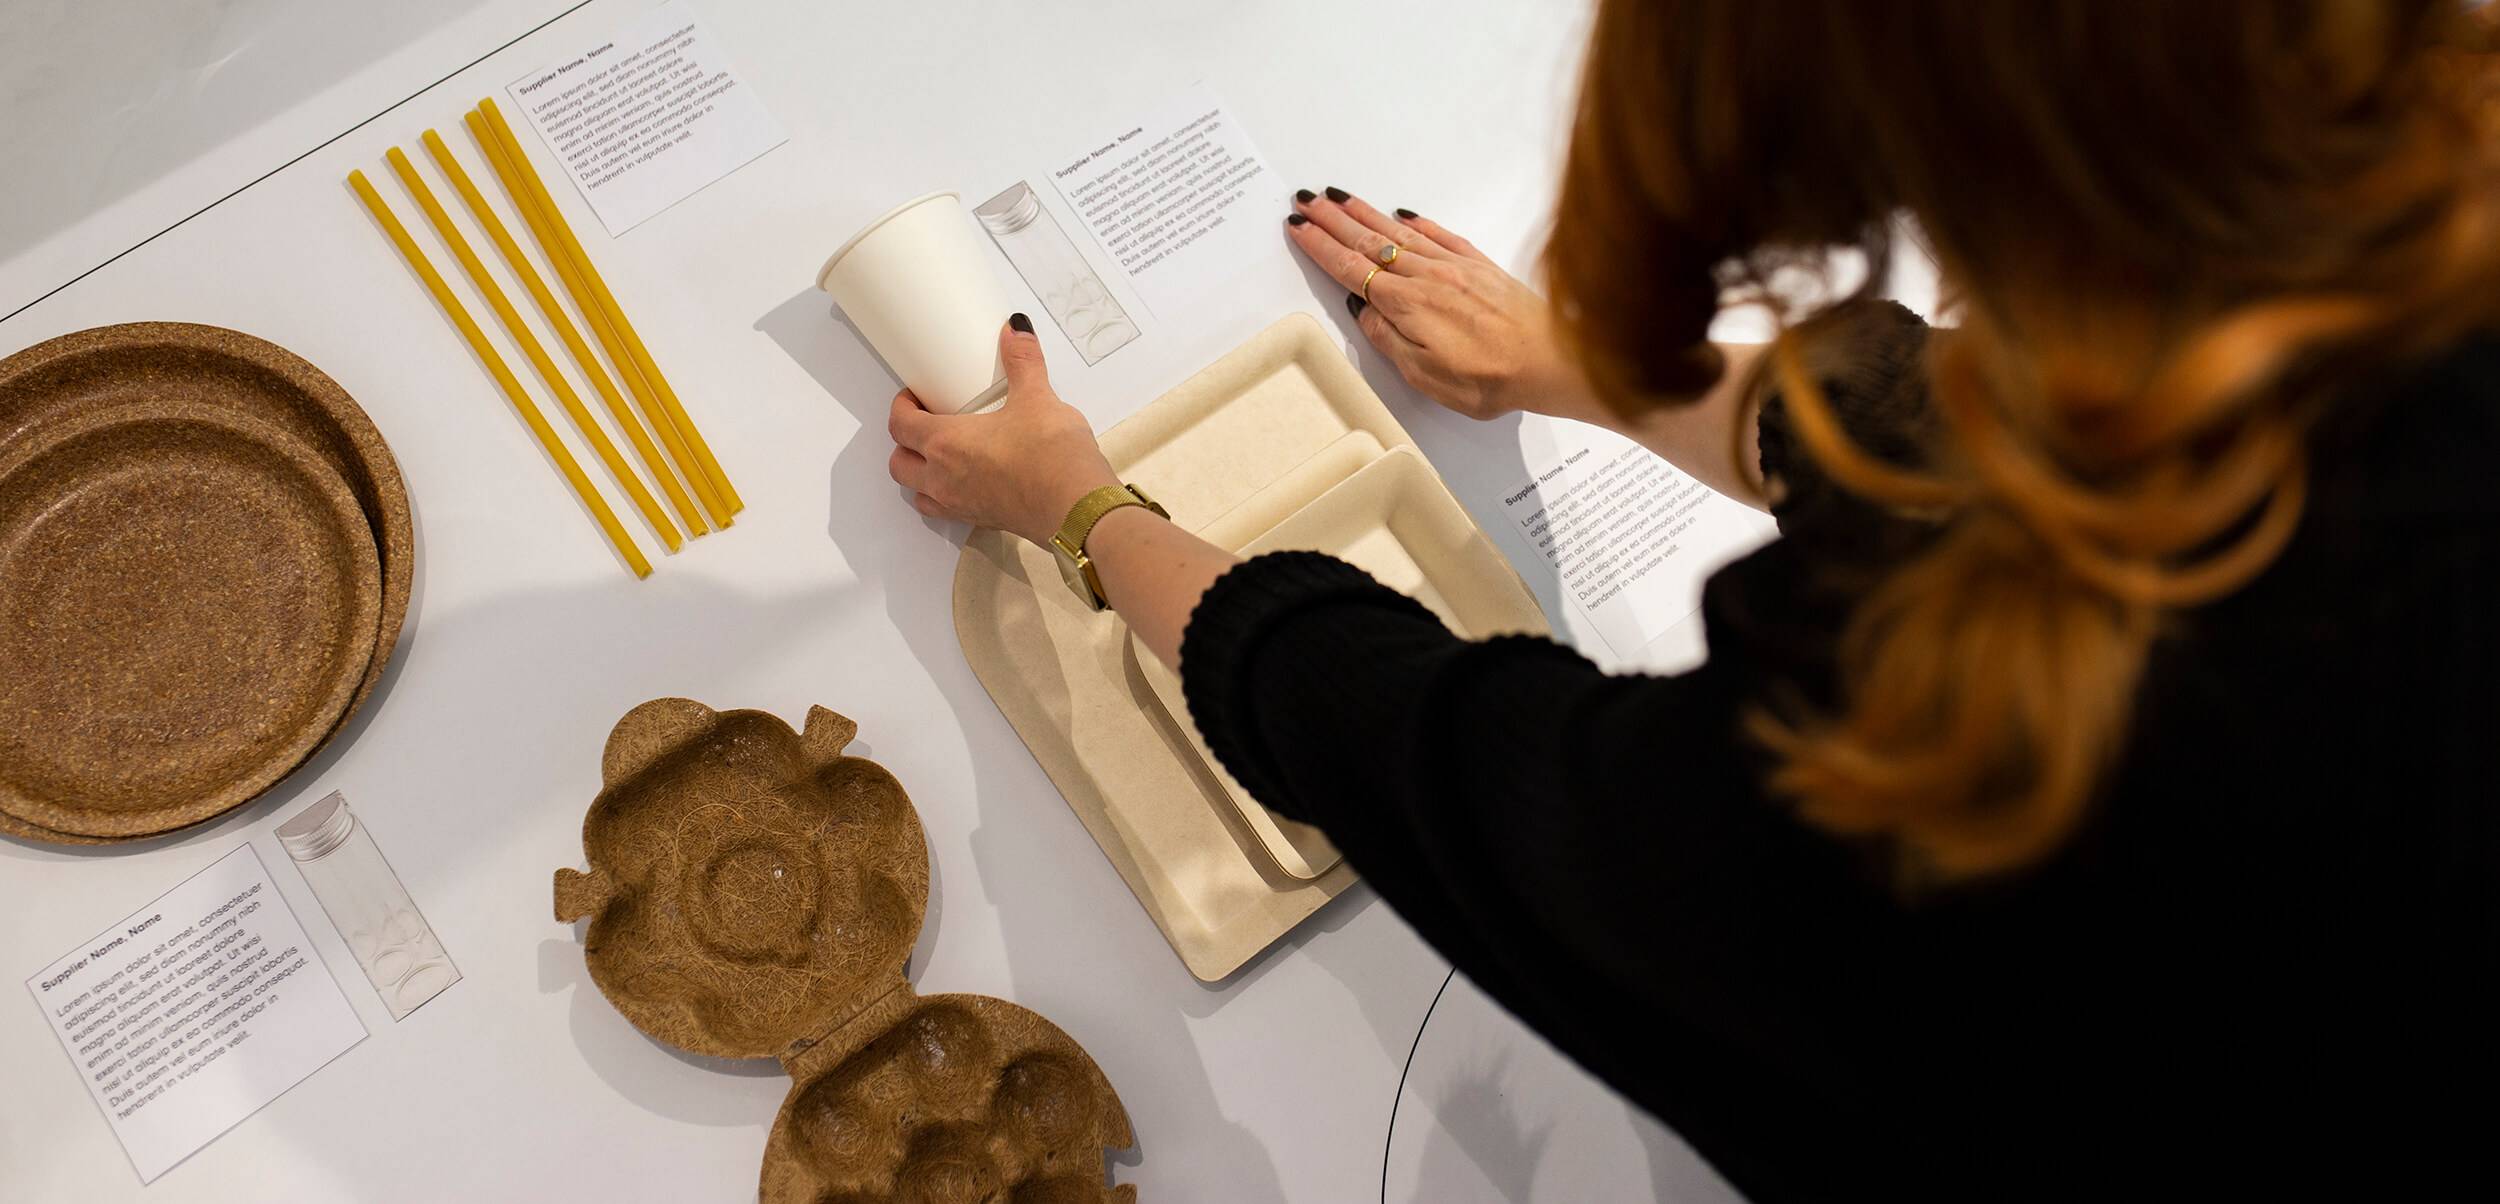 A person laying out materials for an exhibition